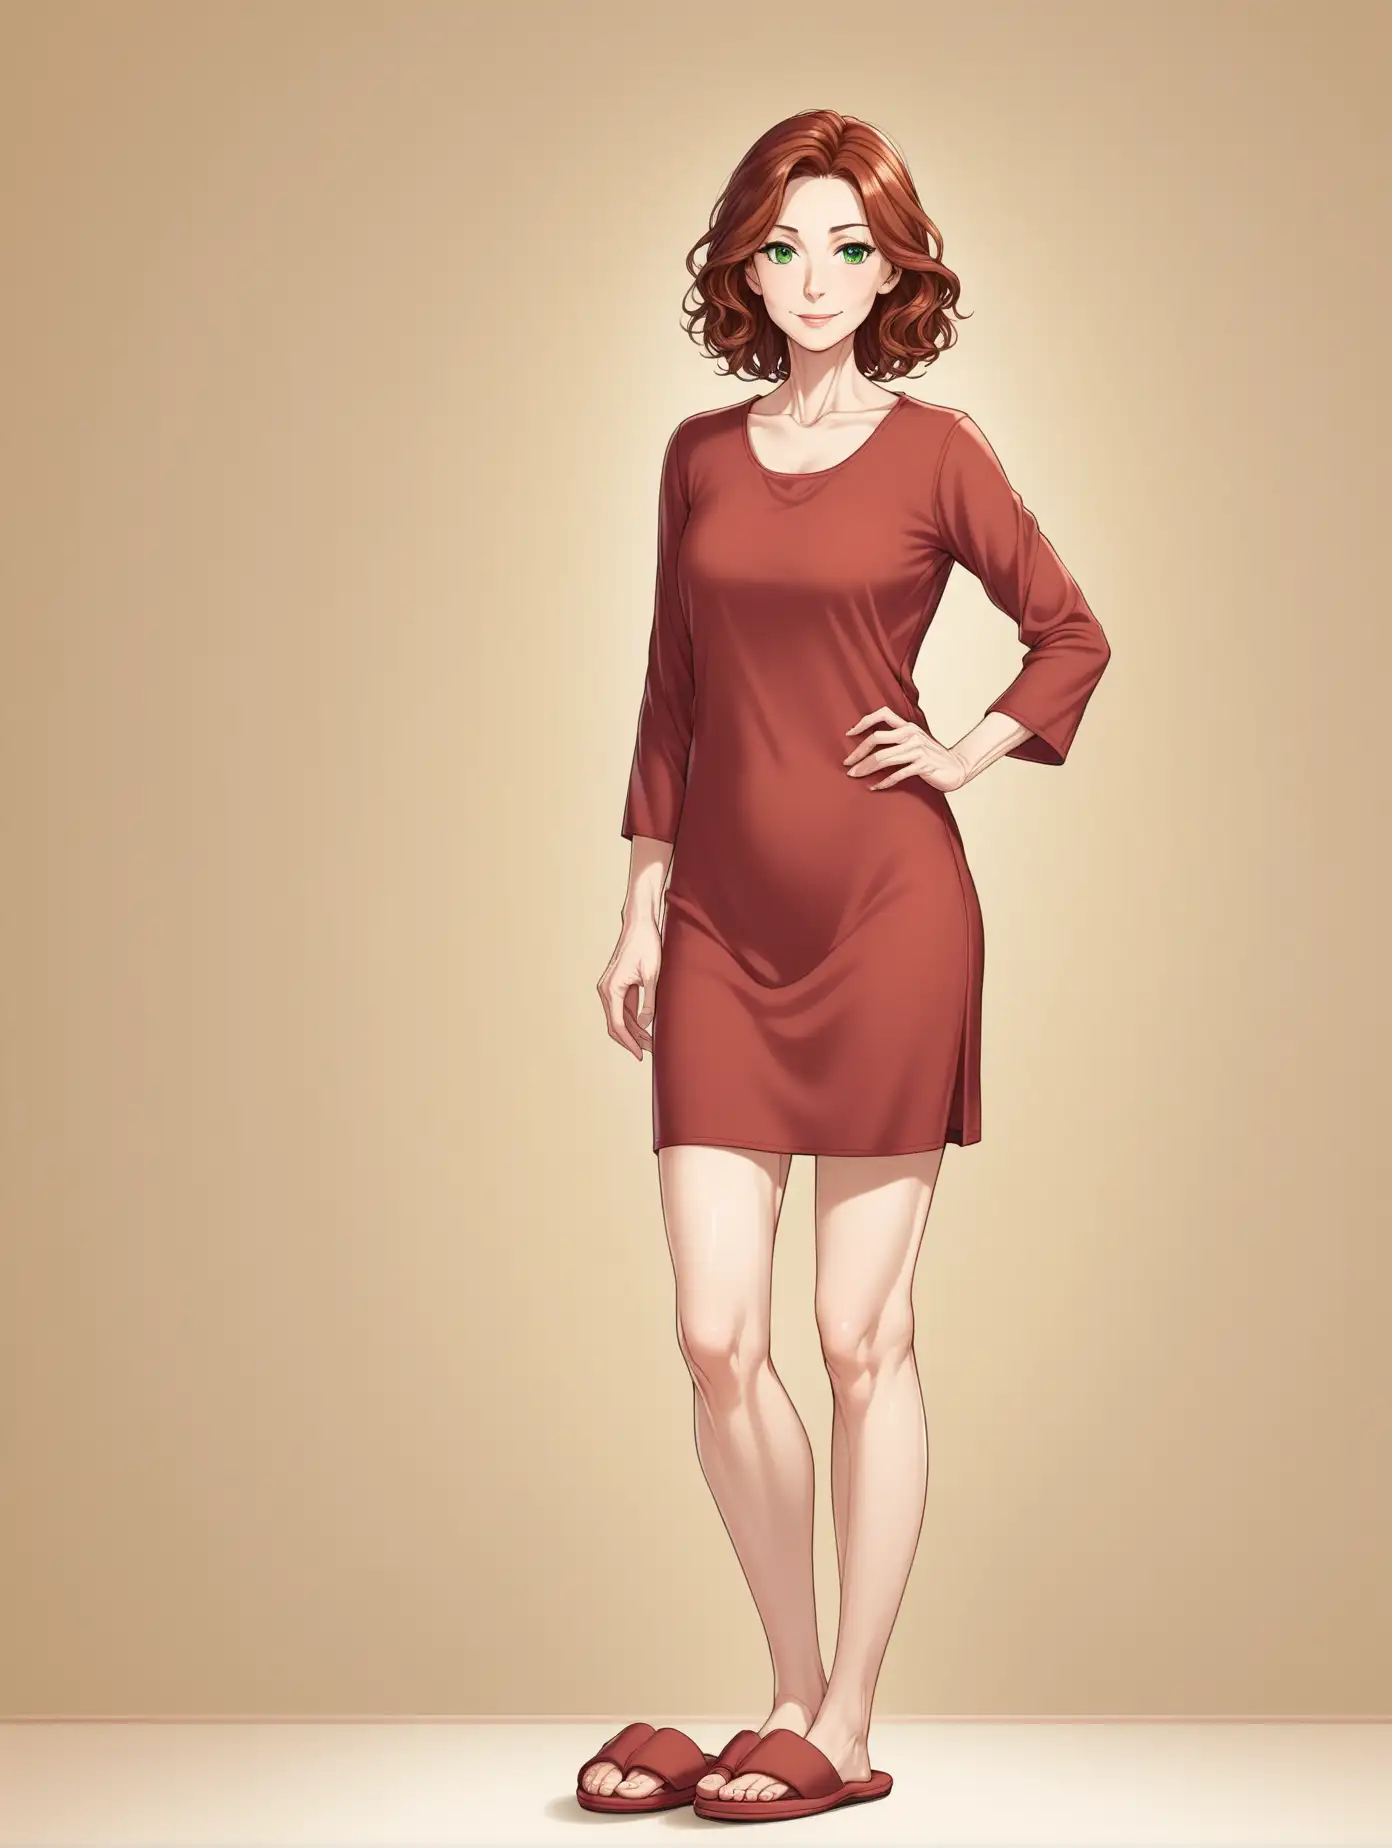 Kind-Mature-Woman-with-Chestnut-Wavy-Hair-Standing-in-Slippers